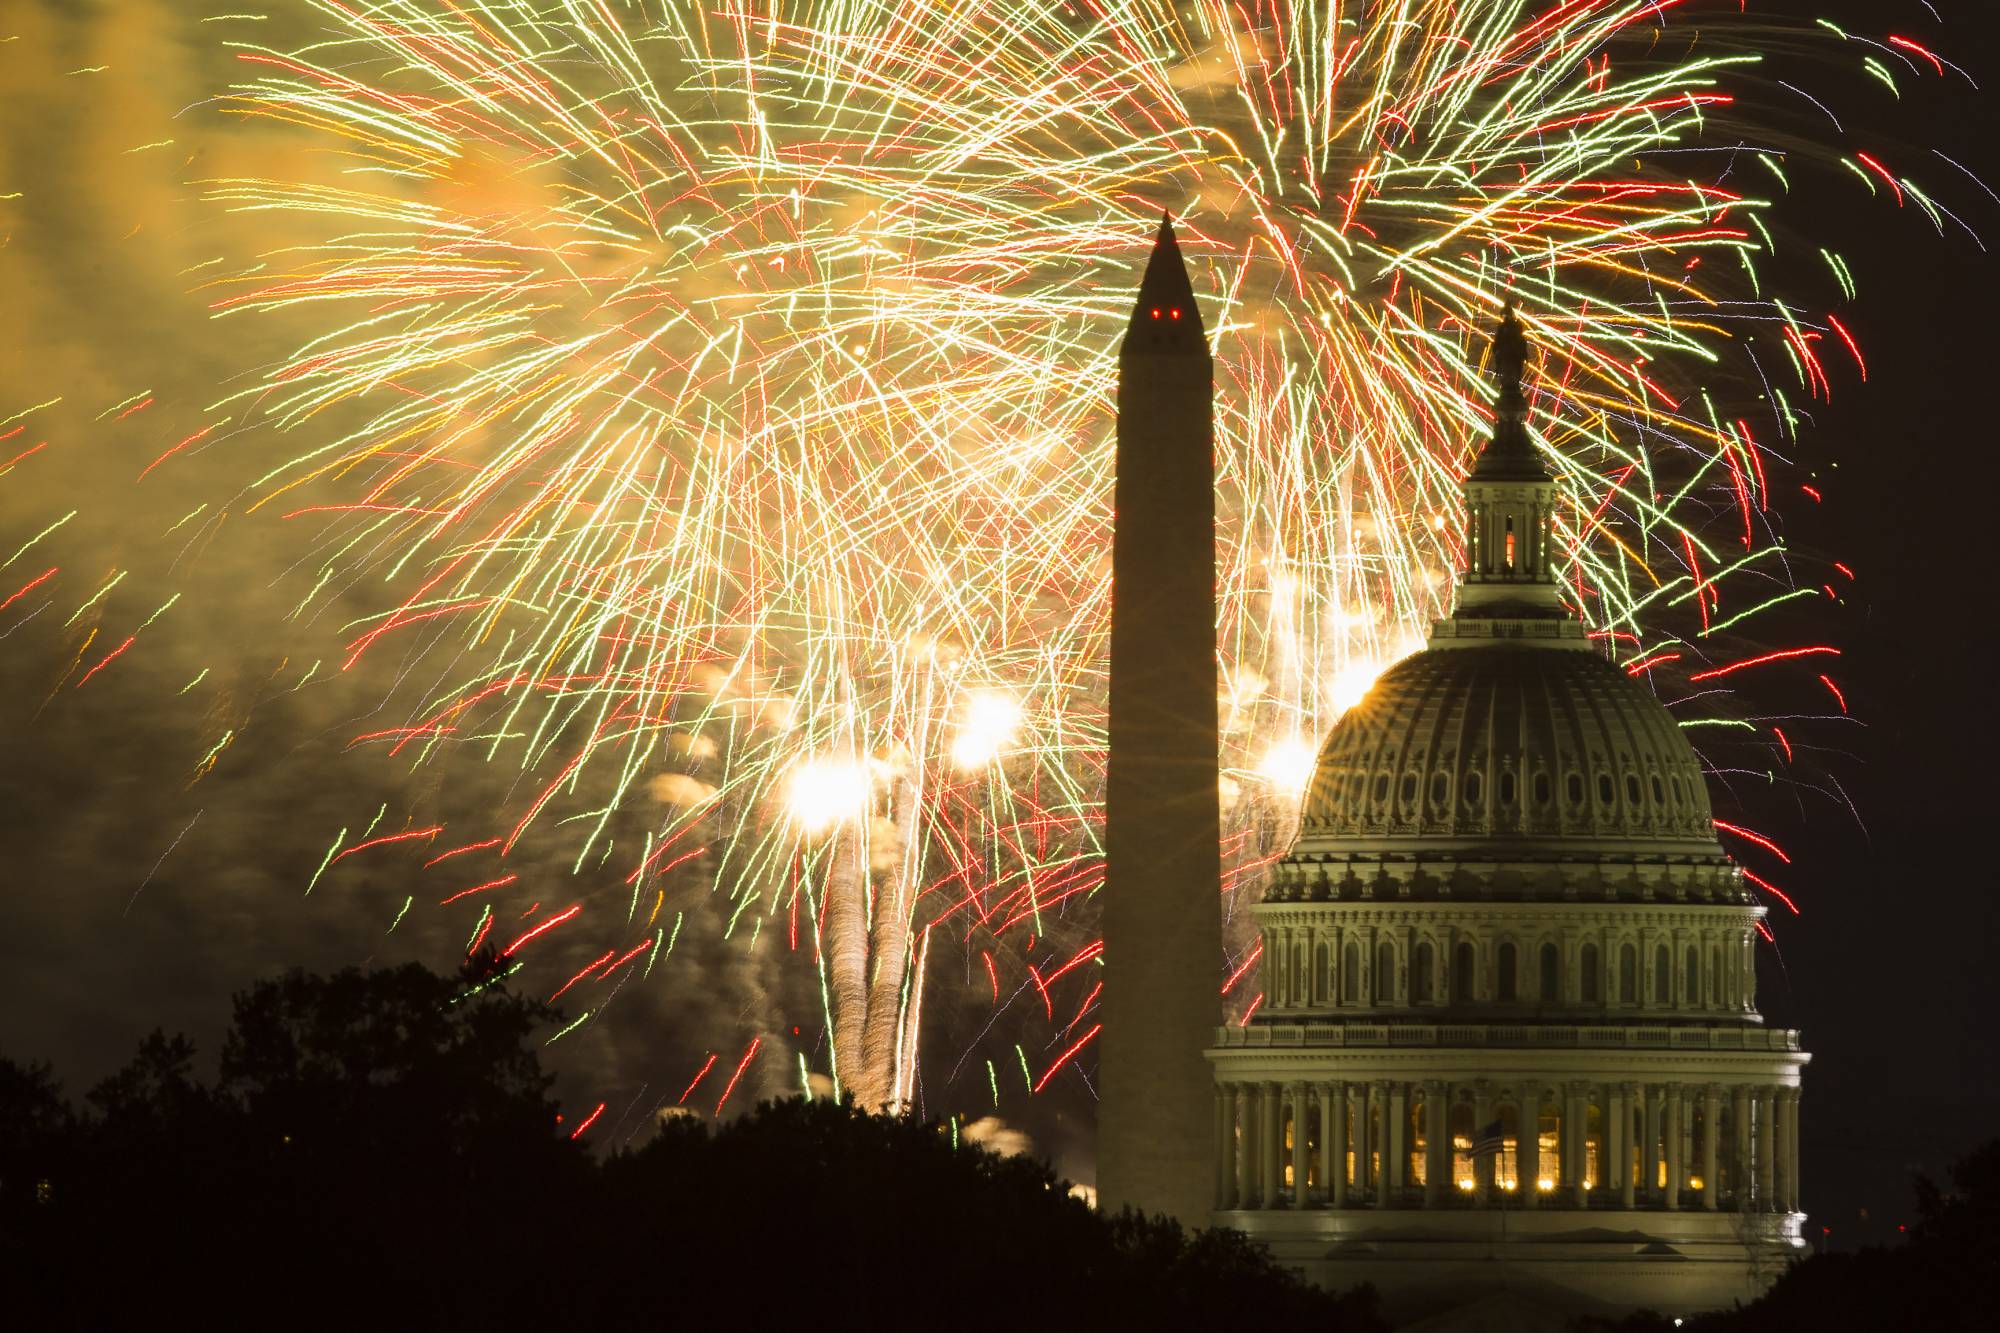 FILE - In this July 4, 2014 file photo, fireworks illuminate the sky over the U.S. Capitol building and the Washington Monument during Fourth of July celebrations in Washington.    PBS’ tradition of broadcasting music and fireworks from the West Lawn of the U.S. Capitol is facing competition from a different live concert in the same city at the same time hosted on the White House’s South Lawn. Though each event will feature competing “American Idol” alums, the PBS’ “A Capitol Fourth” has the bigger stars: The Beach Boys, Jimmy Buffett, Pentatonix, Chita Rivera, Luke Combs, The Temptations, Renee Fleming, CeCe Winans, Joshua Bell and “American Idol” singer Lauren Alaina. It will be hosted by John Stamos.(AP Photo/Evan Vucci, File)